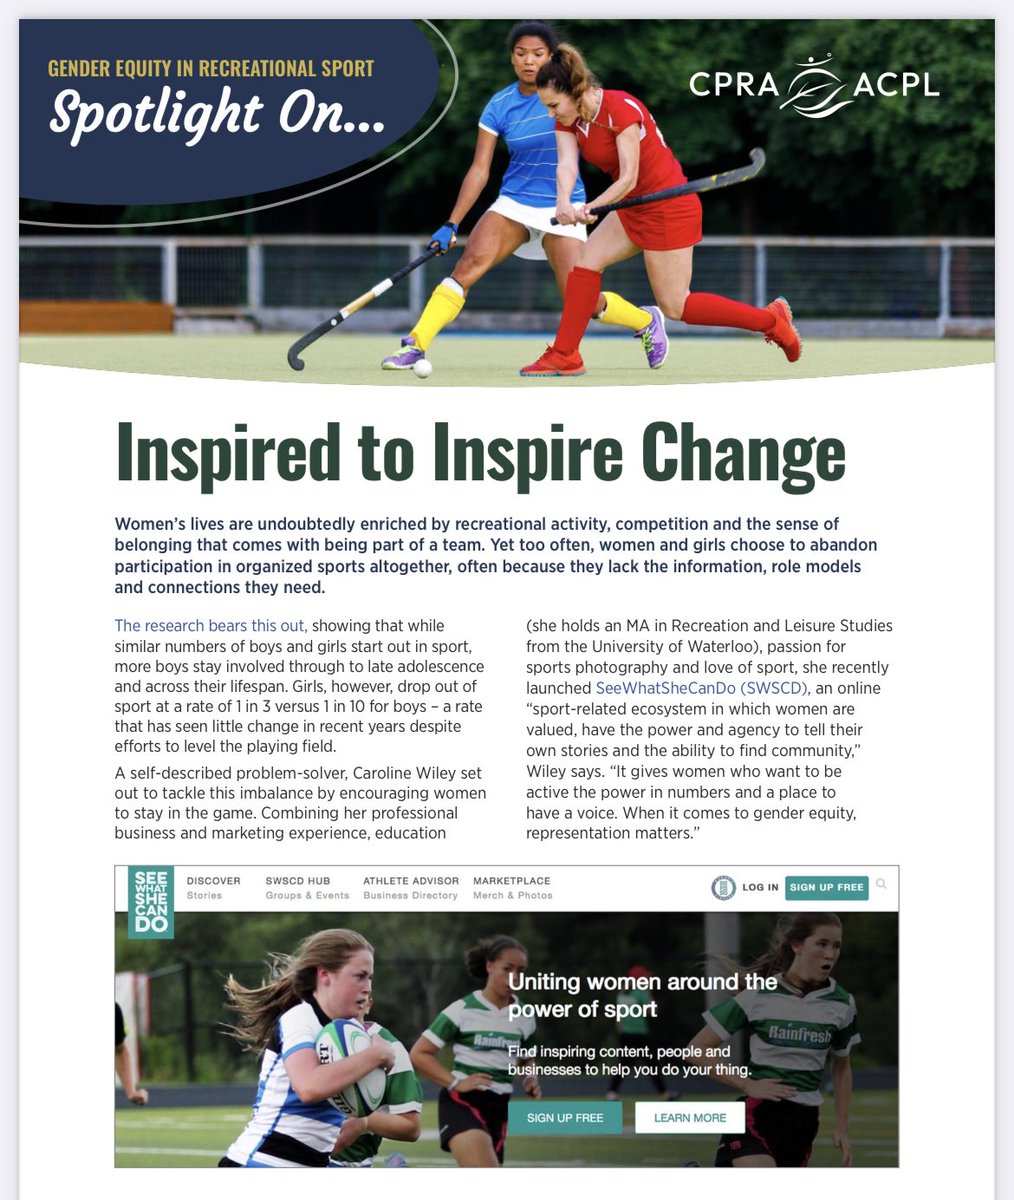 Thx to @CPRA_ACPL 4 featuring #SWSCD & our efforts to empower women thru sport & community & our efforts to create a more equitable sport/recreation/physical activity world for all through investment & innovation. cpra.ca/wp-content/upl… #SeeWhatSheCanDo #CPRA #ACPL #LetsAllPlay